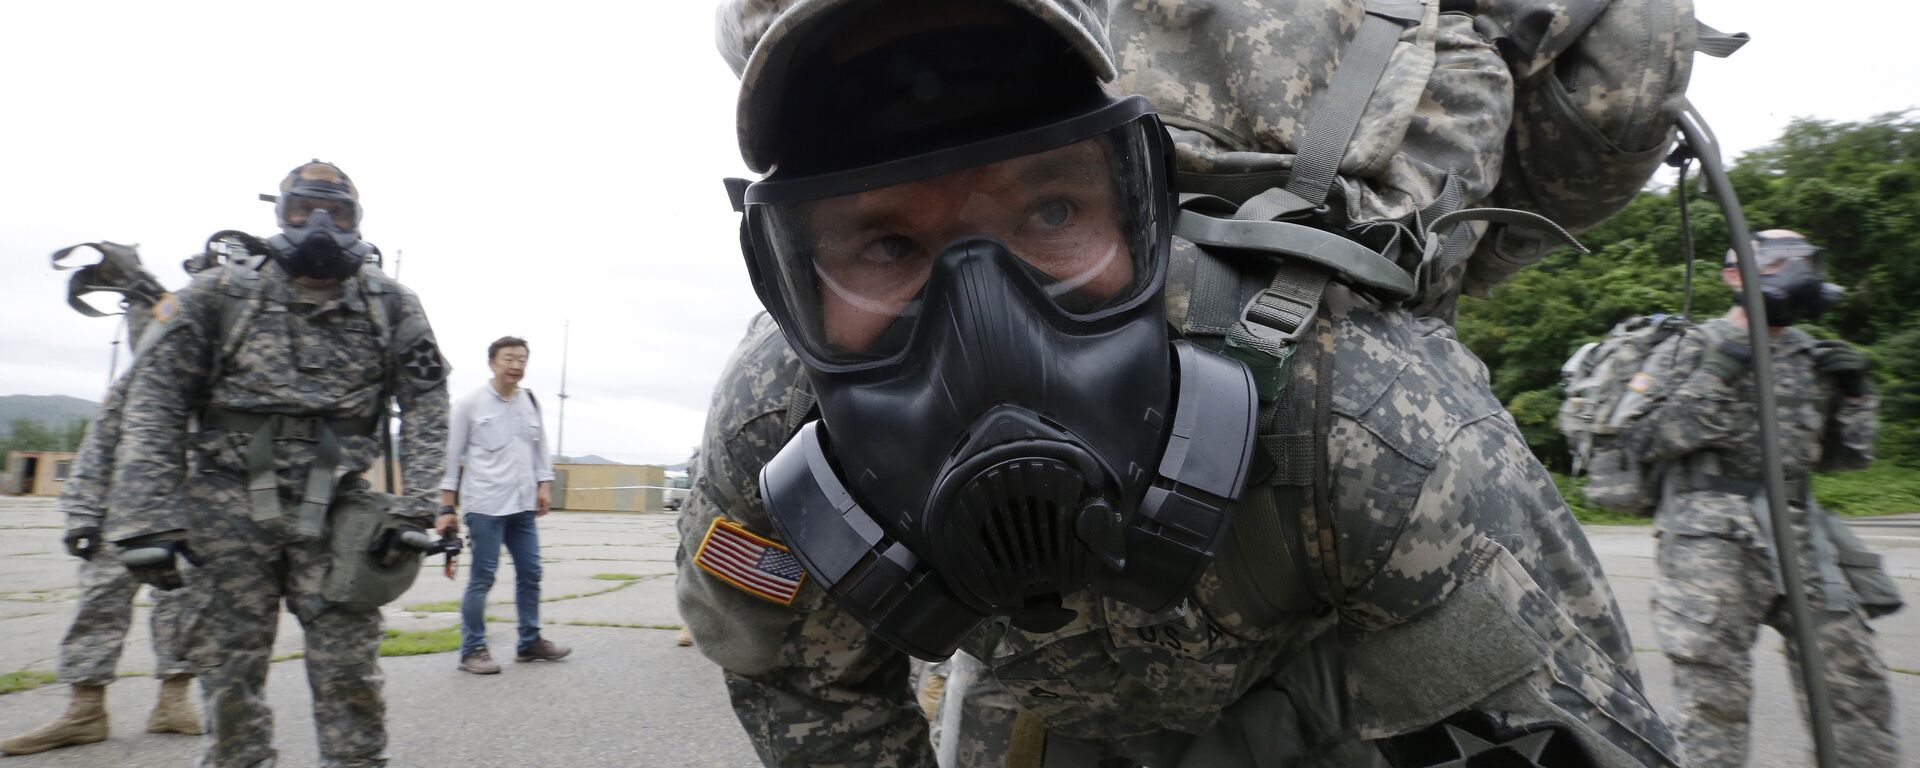 A soldiers of the U.S. Army 23rd chemical battalion wearing a gas mask rests after a competition at Camp Stanley in Uijeongbu, South Korea, Wednesday, July 8, 2015 - Sputnik International, 1920, 06.07.2023